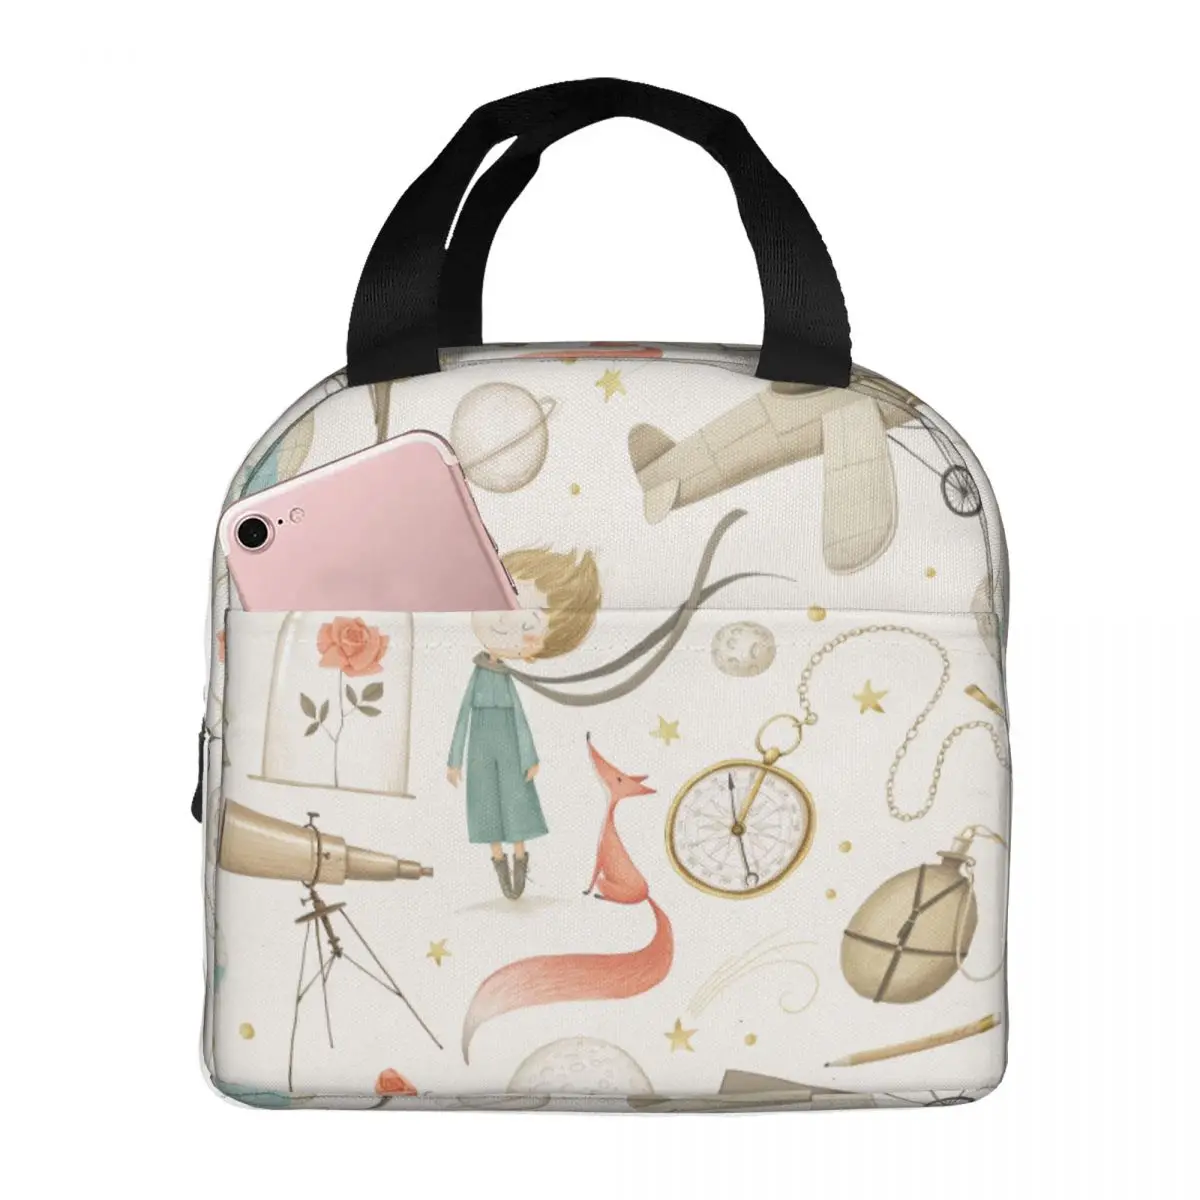 Lunch Bags for Women Kids The Little Prince Thermal Cooler Portable Picnic Oxford Tote Handbags